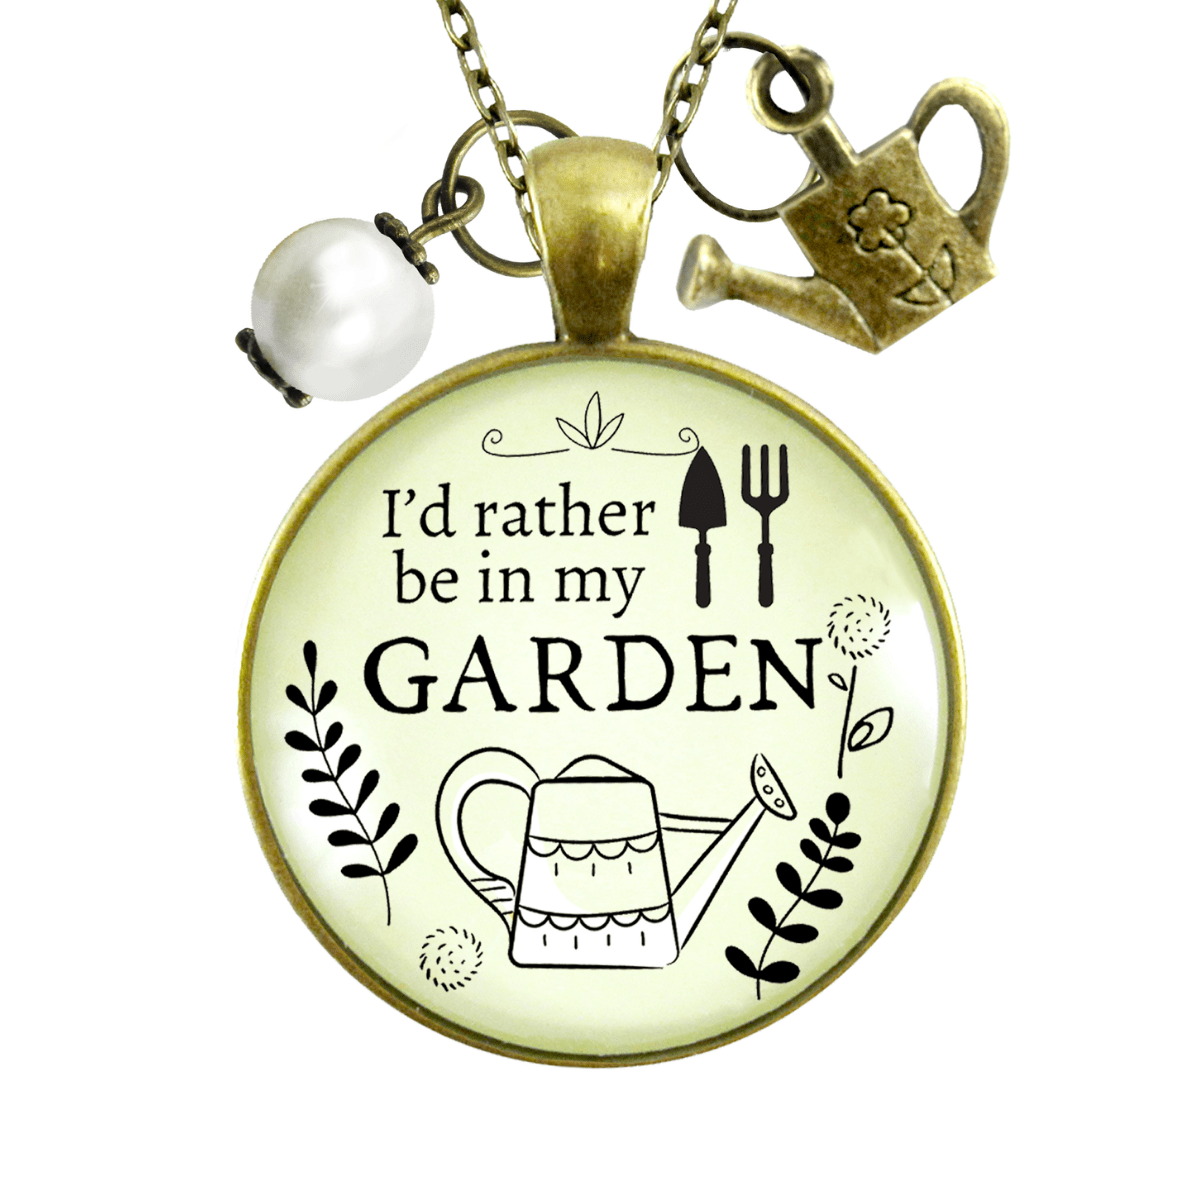 Gutsy Goodness Gardening Necklace I'd Rather Be in My Garden Plant Lady Quote Gift Jewelry - Gutsy Goodness;Gardening Necklace I'd Rather Be In My Garden Plant Lady Quote Gift Jewelry - Gutsy Goodness Handmade Jewelry Gifts